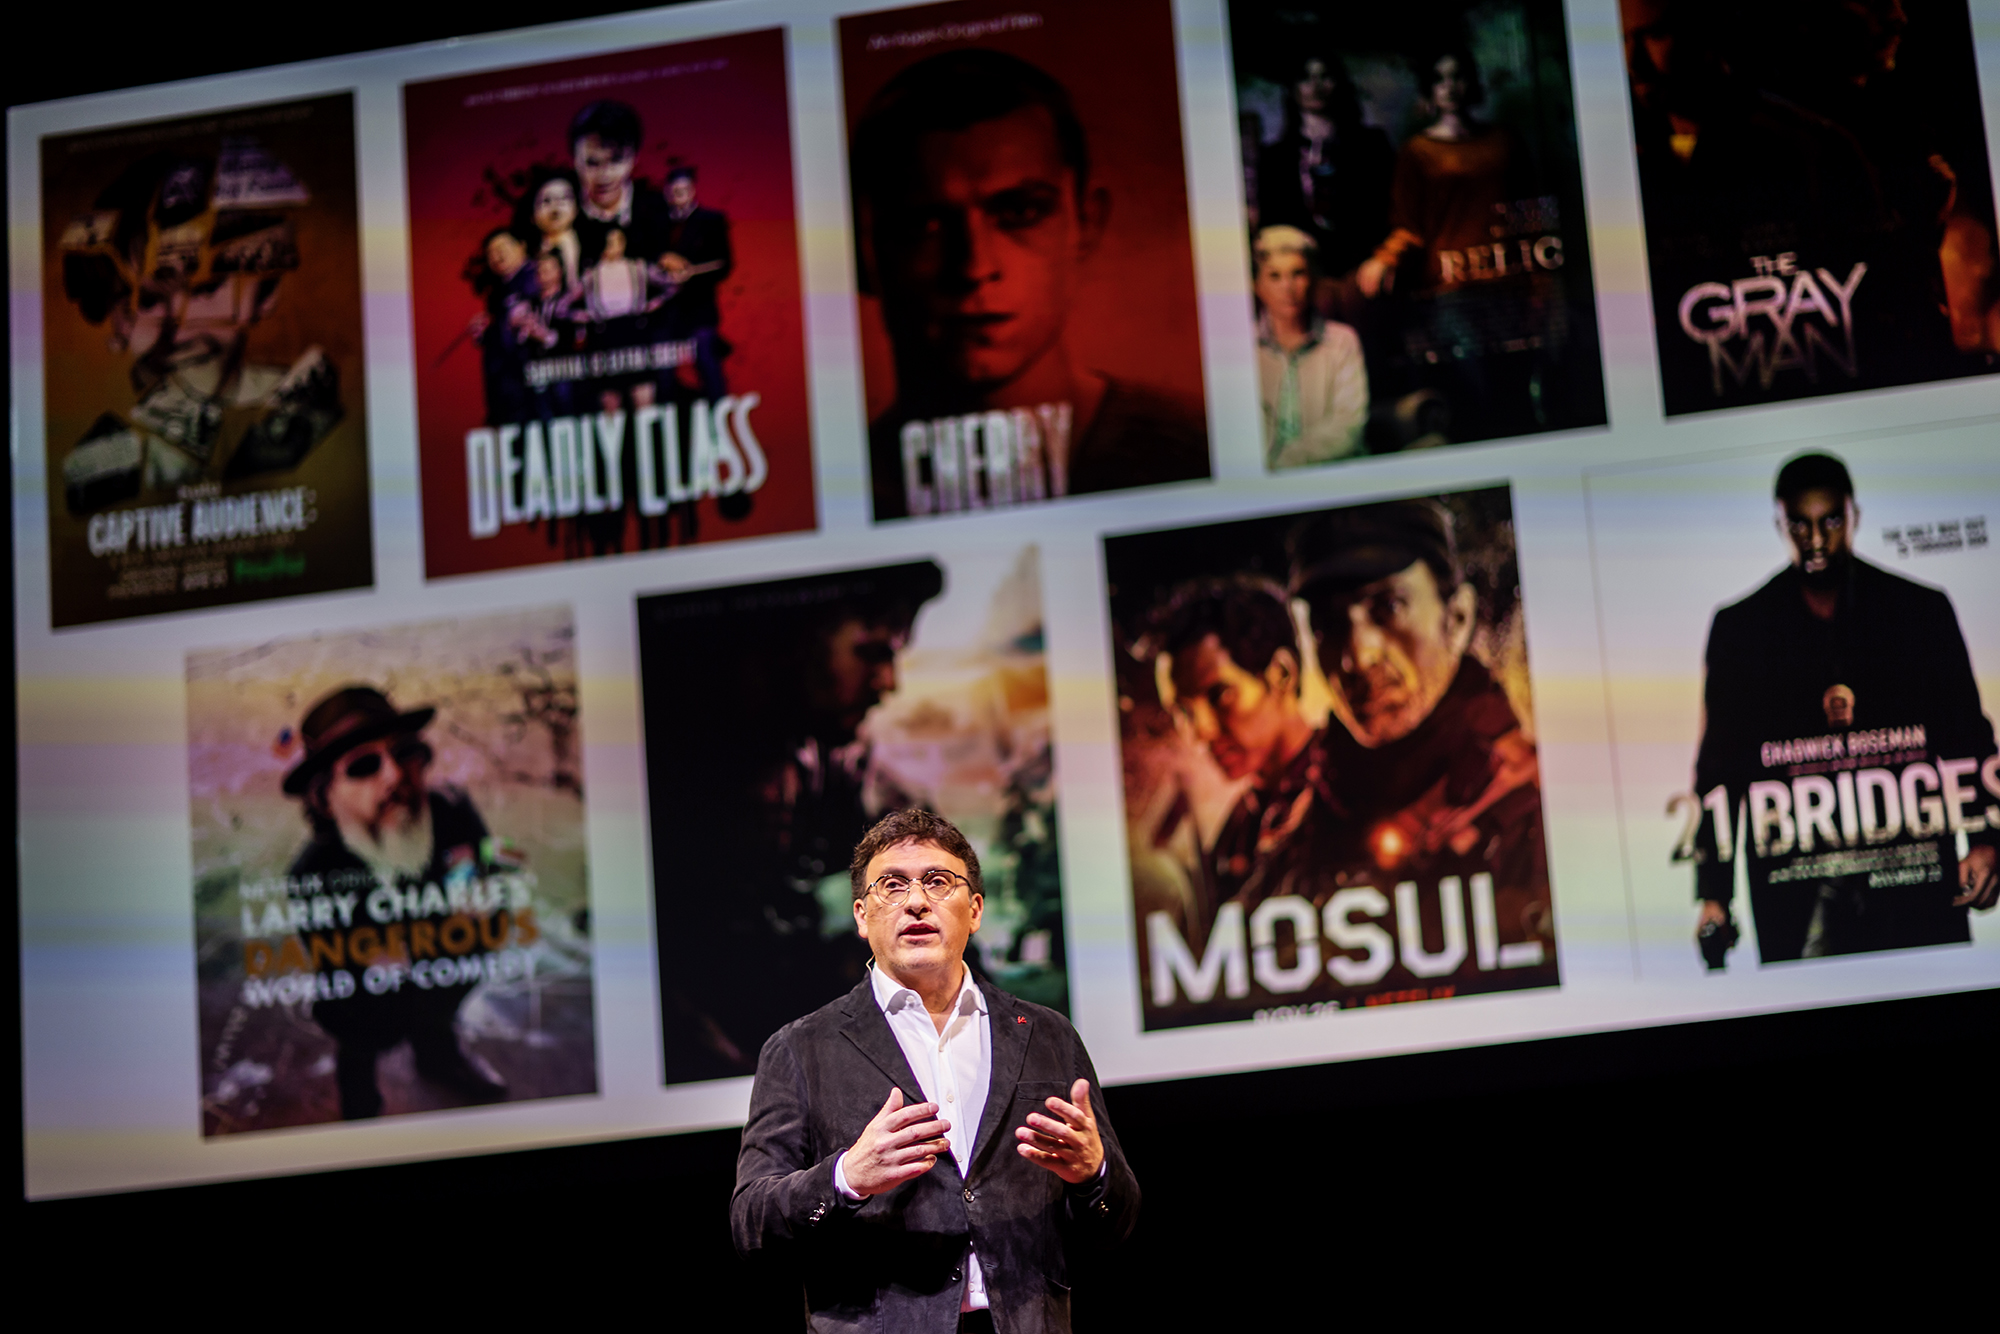 Anthony Russo speaks on stage with movies he's directed in the background